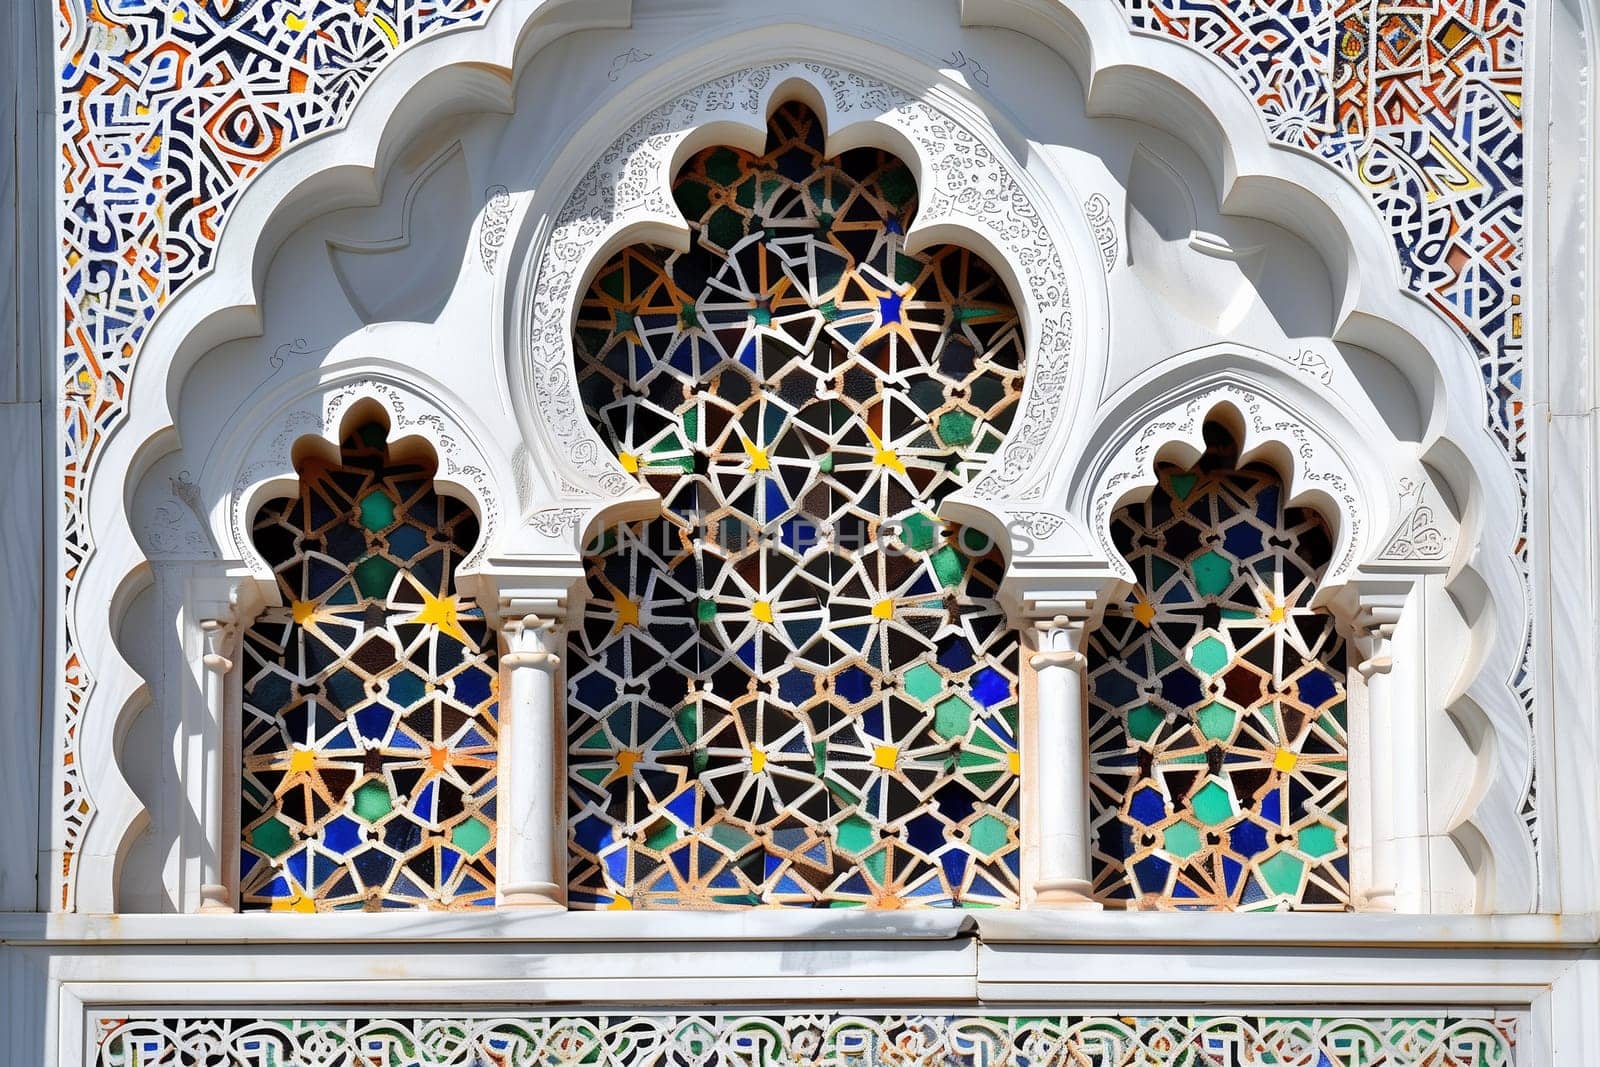 A window featuring a detailed and elaborate decorative design on the side, showcasing traditional Islamic-inspired patterns and motifs.